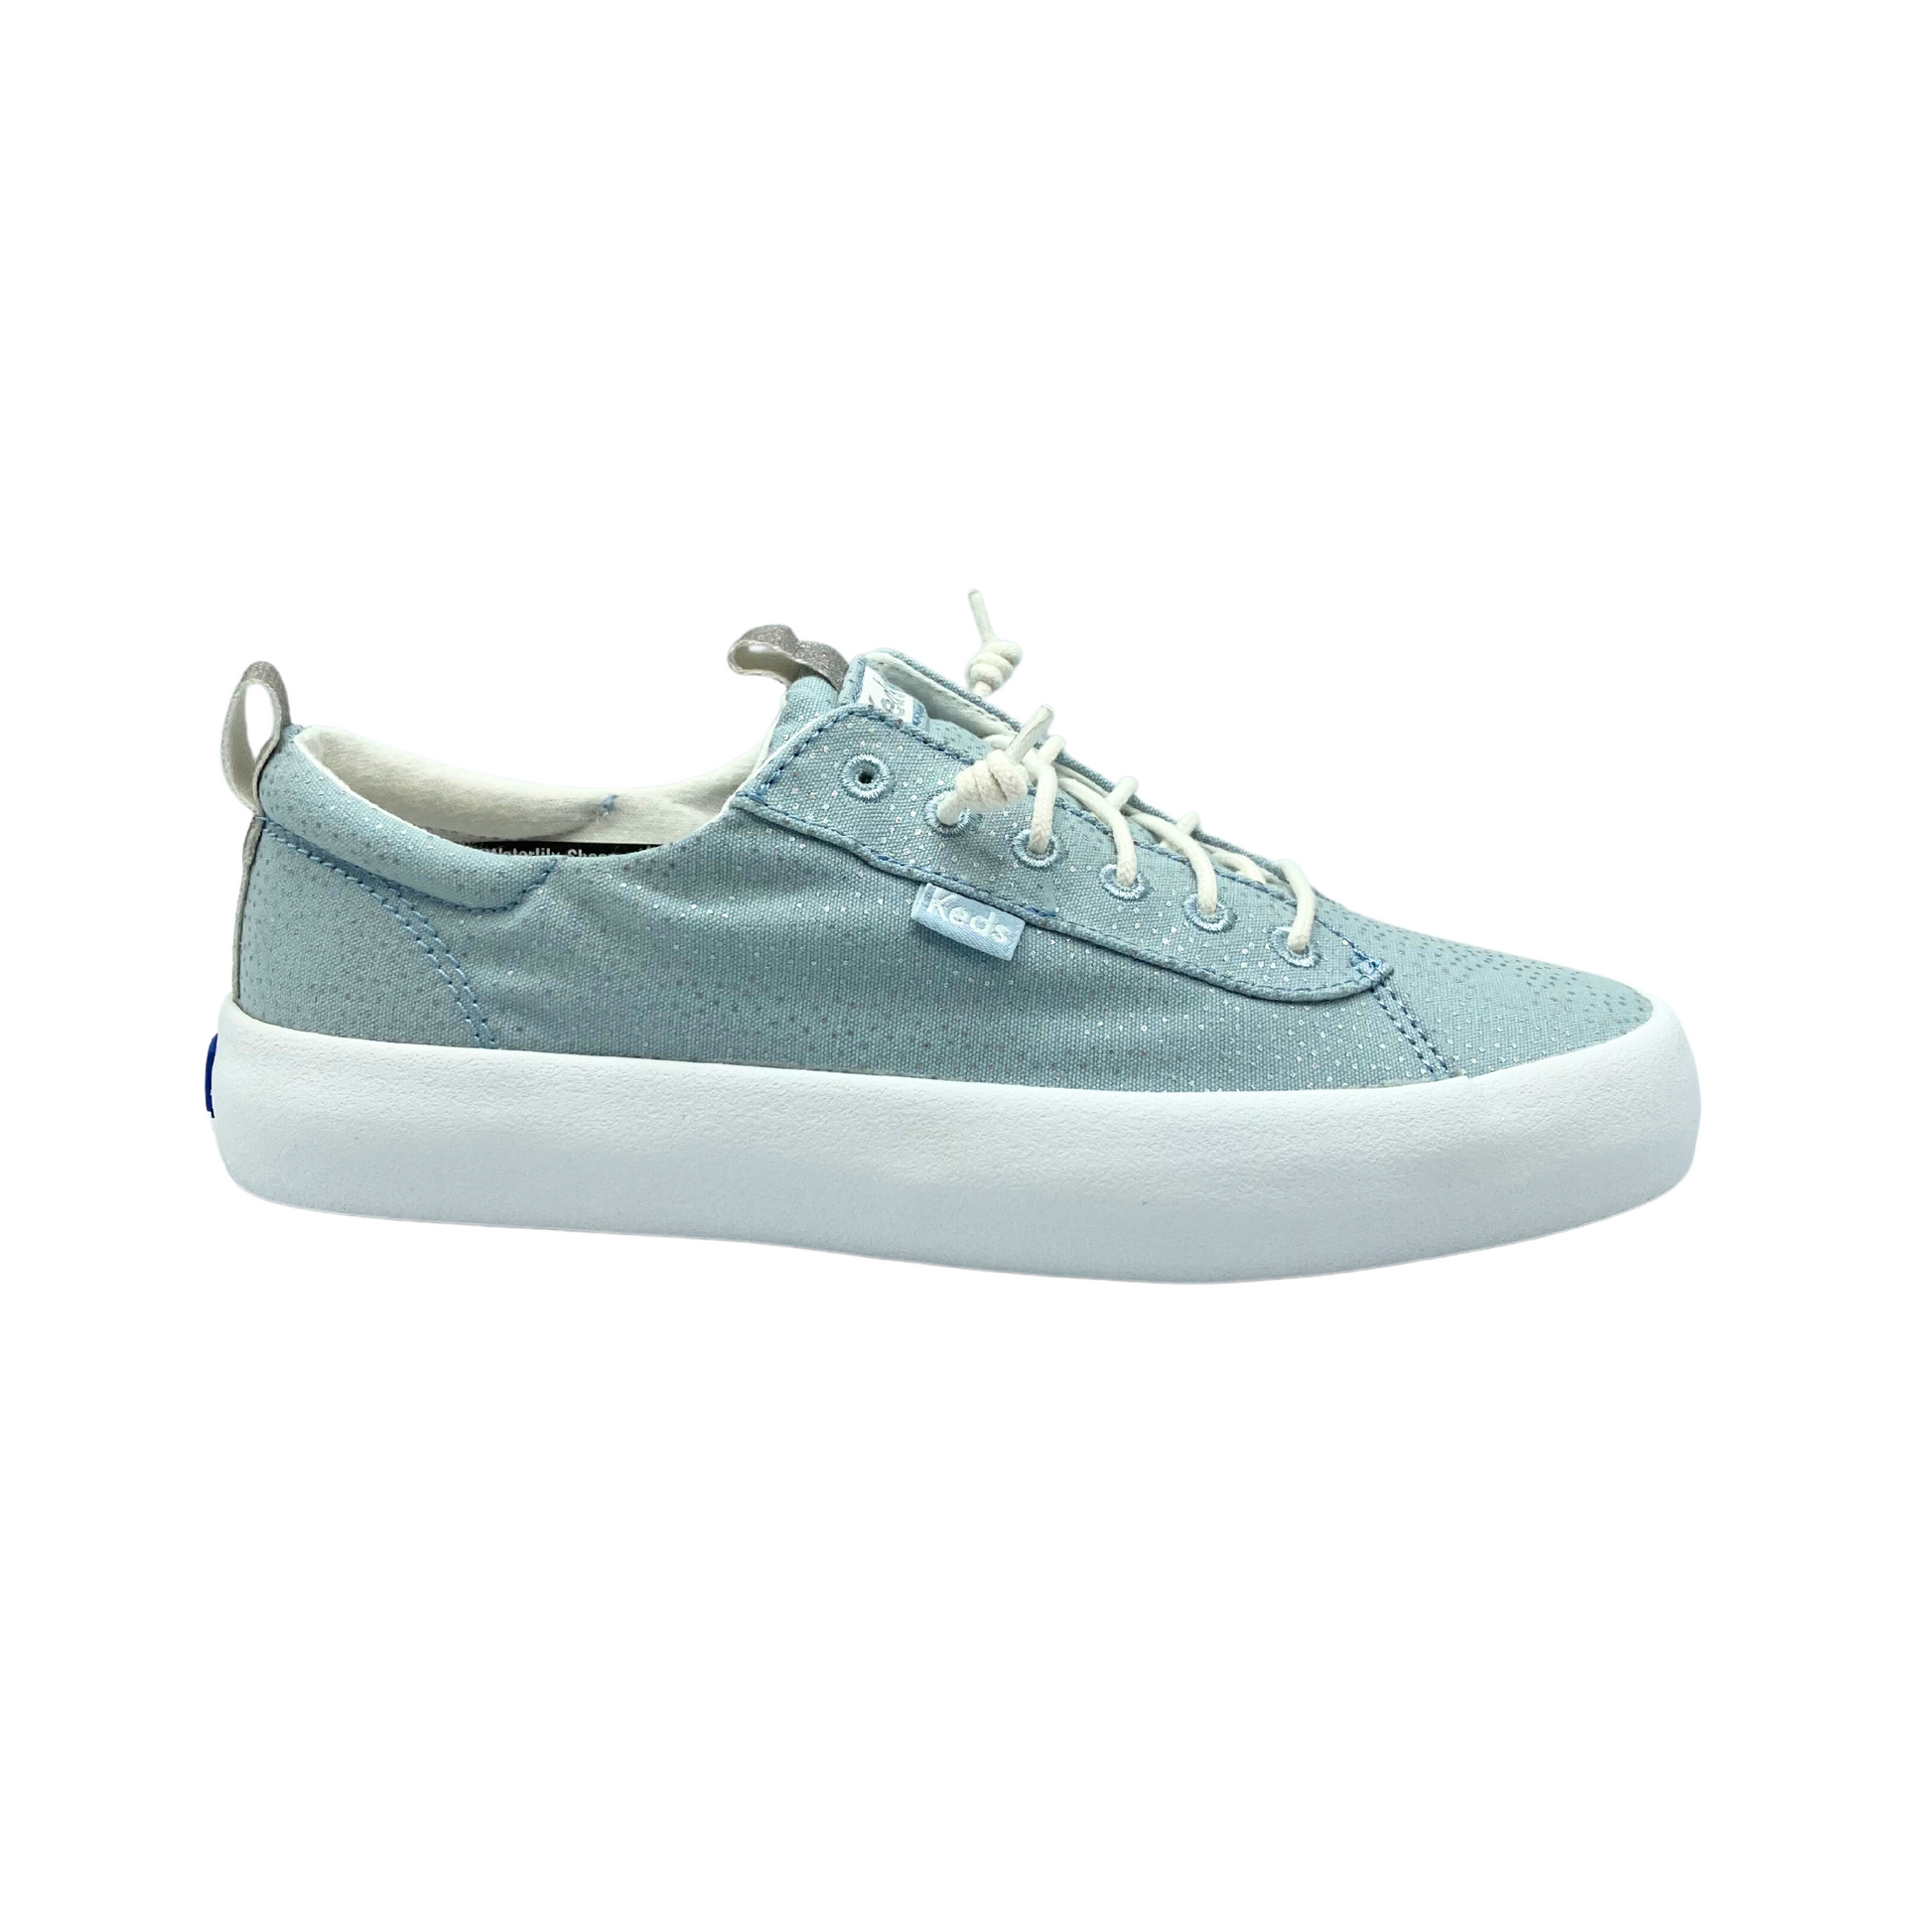 Outside  view of a canvas, slip on sneaker in a light blue/silver with a white rubber outsole